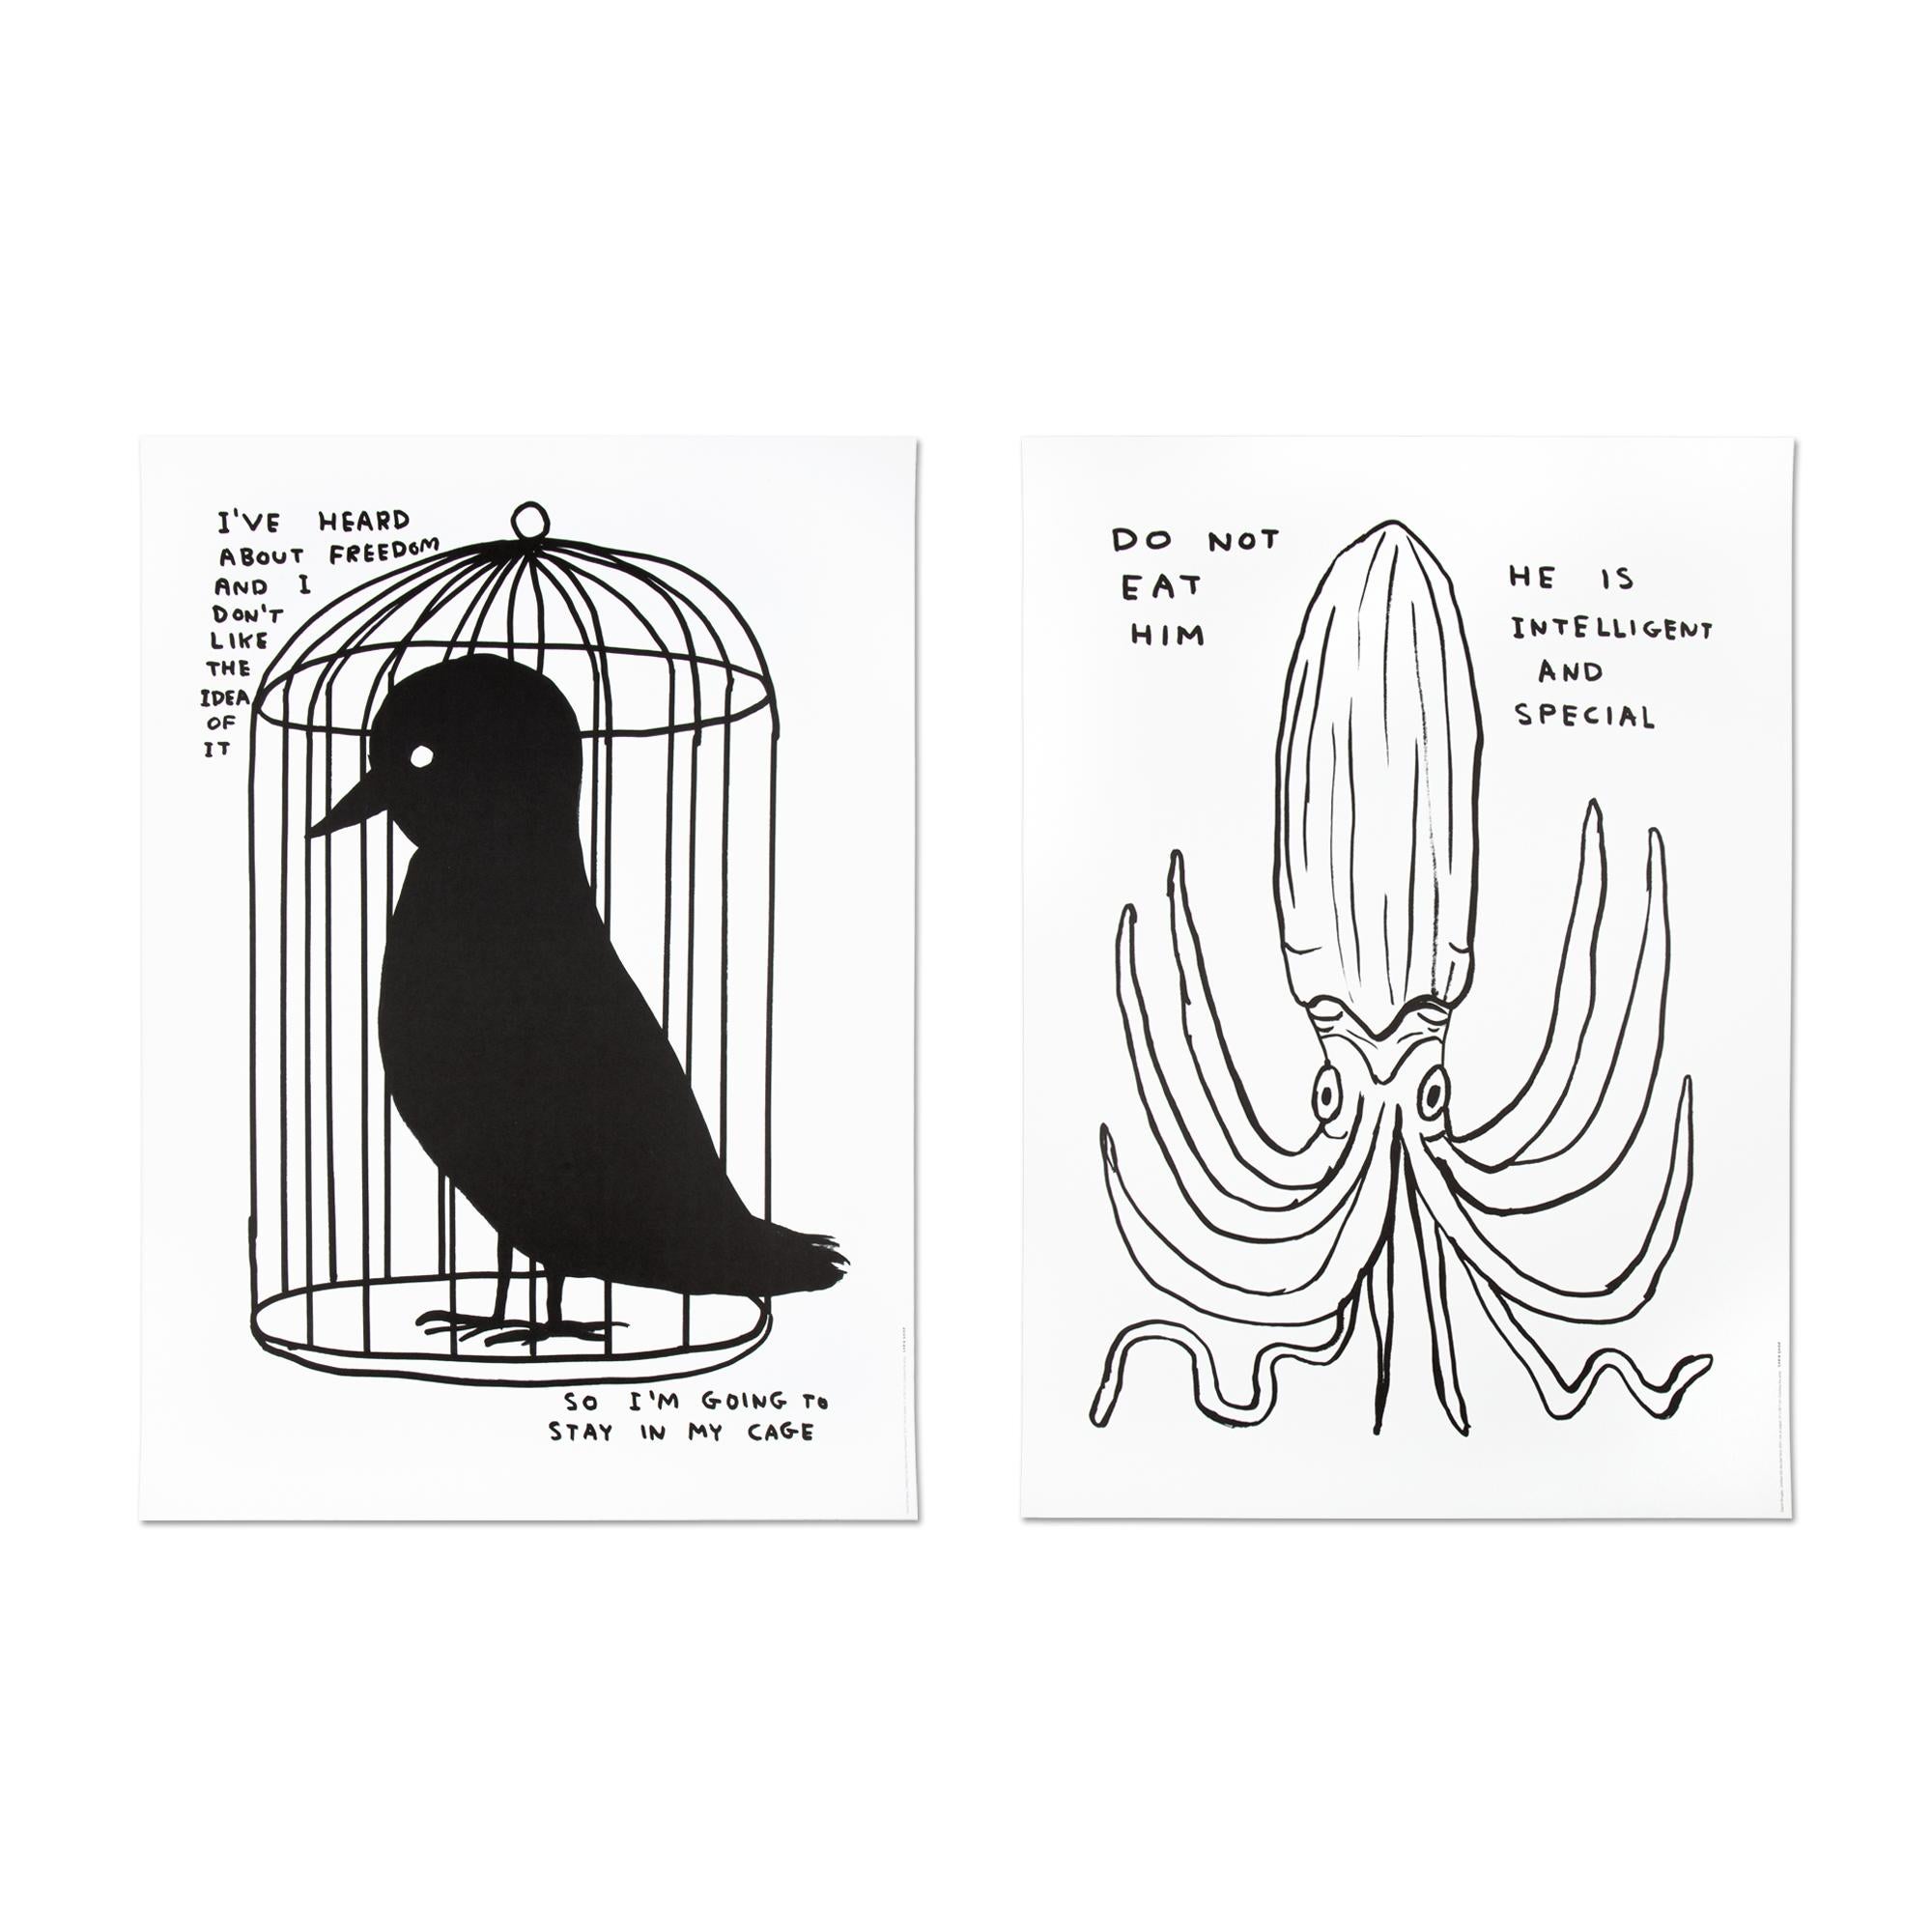 David Shrigley (British, 1968)
I’ve Heard About Freedom + Do Not Eat Him, 2022
Medium: Set of two digital prints on paper
Dimensions: 70 x 50 cm (27 3/5 × 19 7/10 in)
Edition of 250: Not signed, not numbered
Condition: Mint